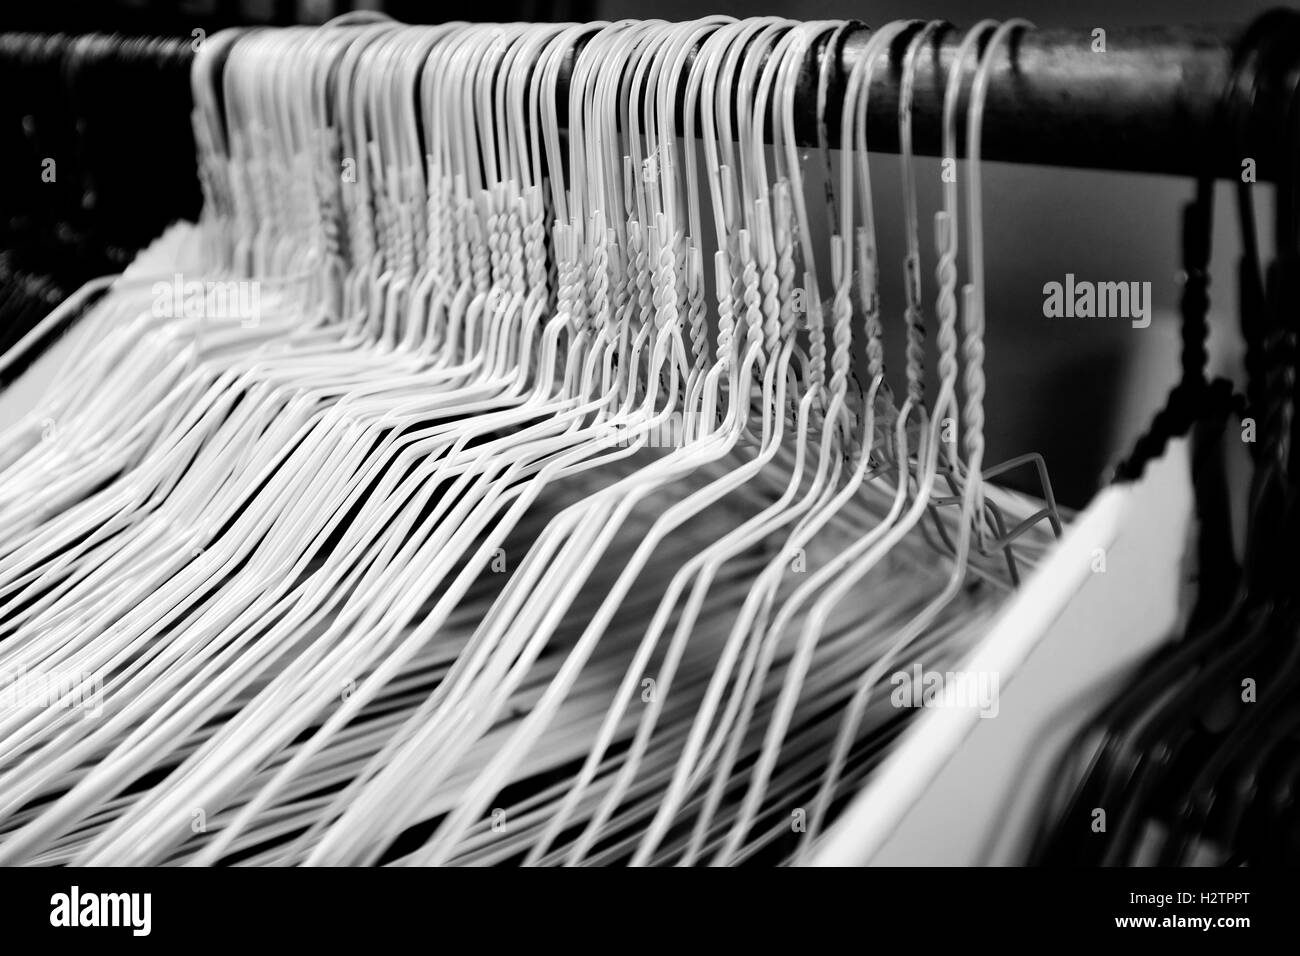 Many several metal wire hangers on pole for hanging clothing in closet storage Stock Photo